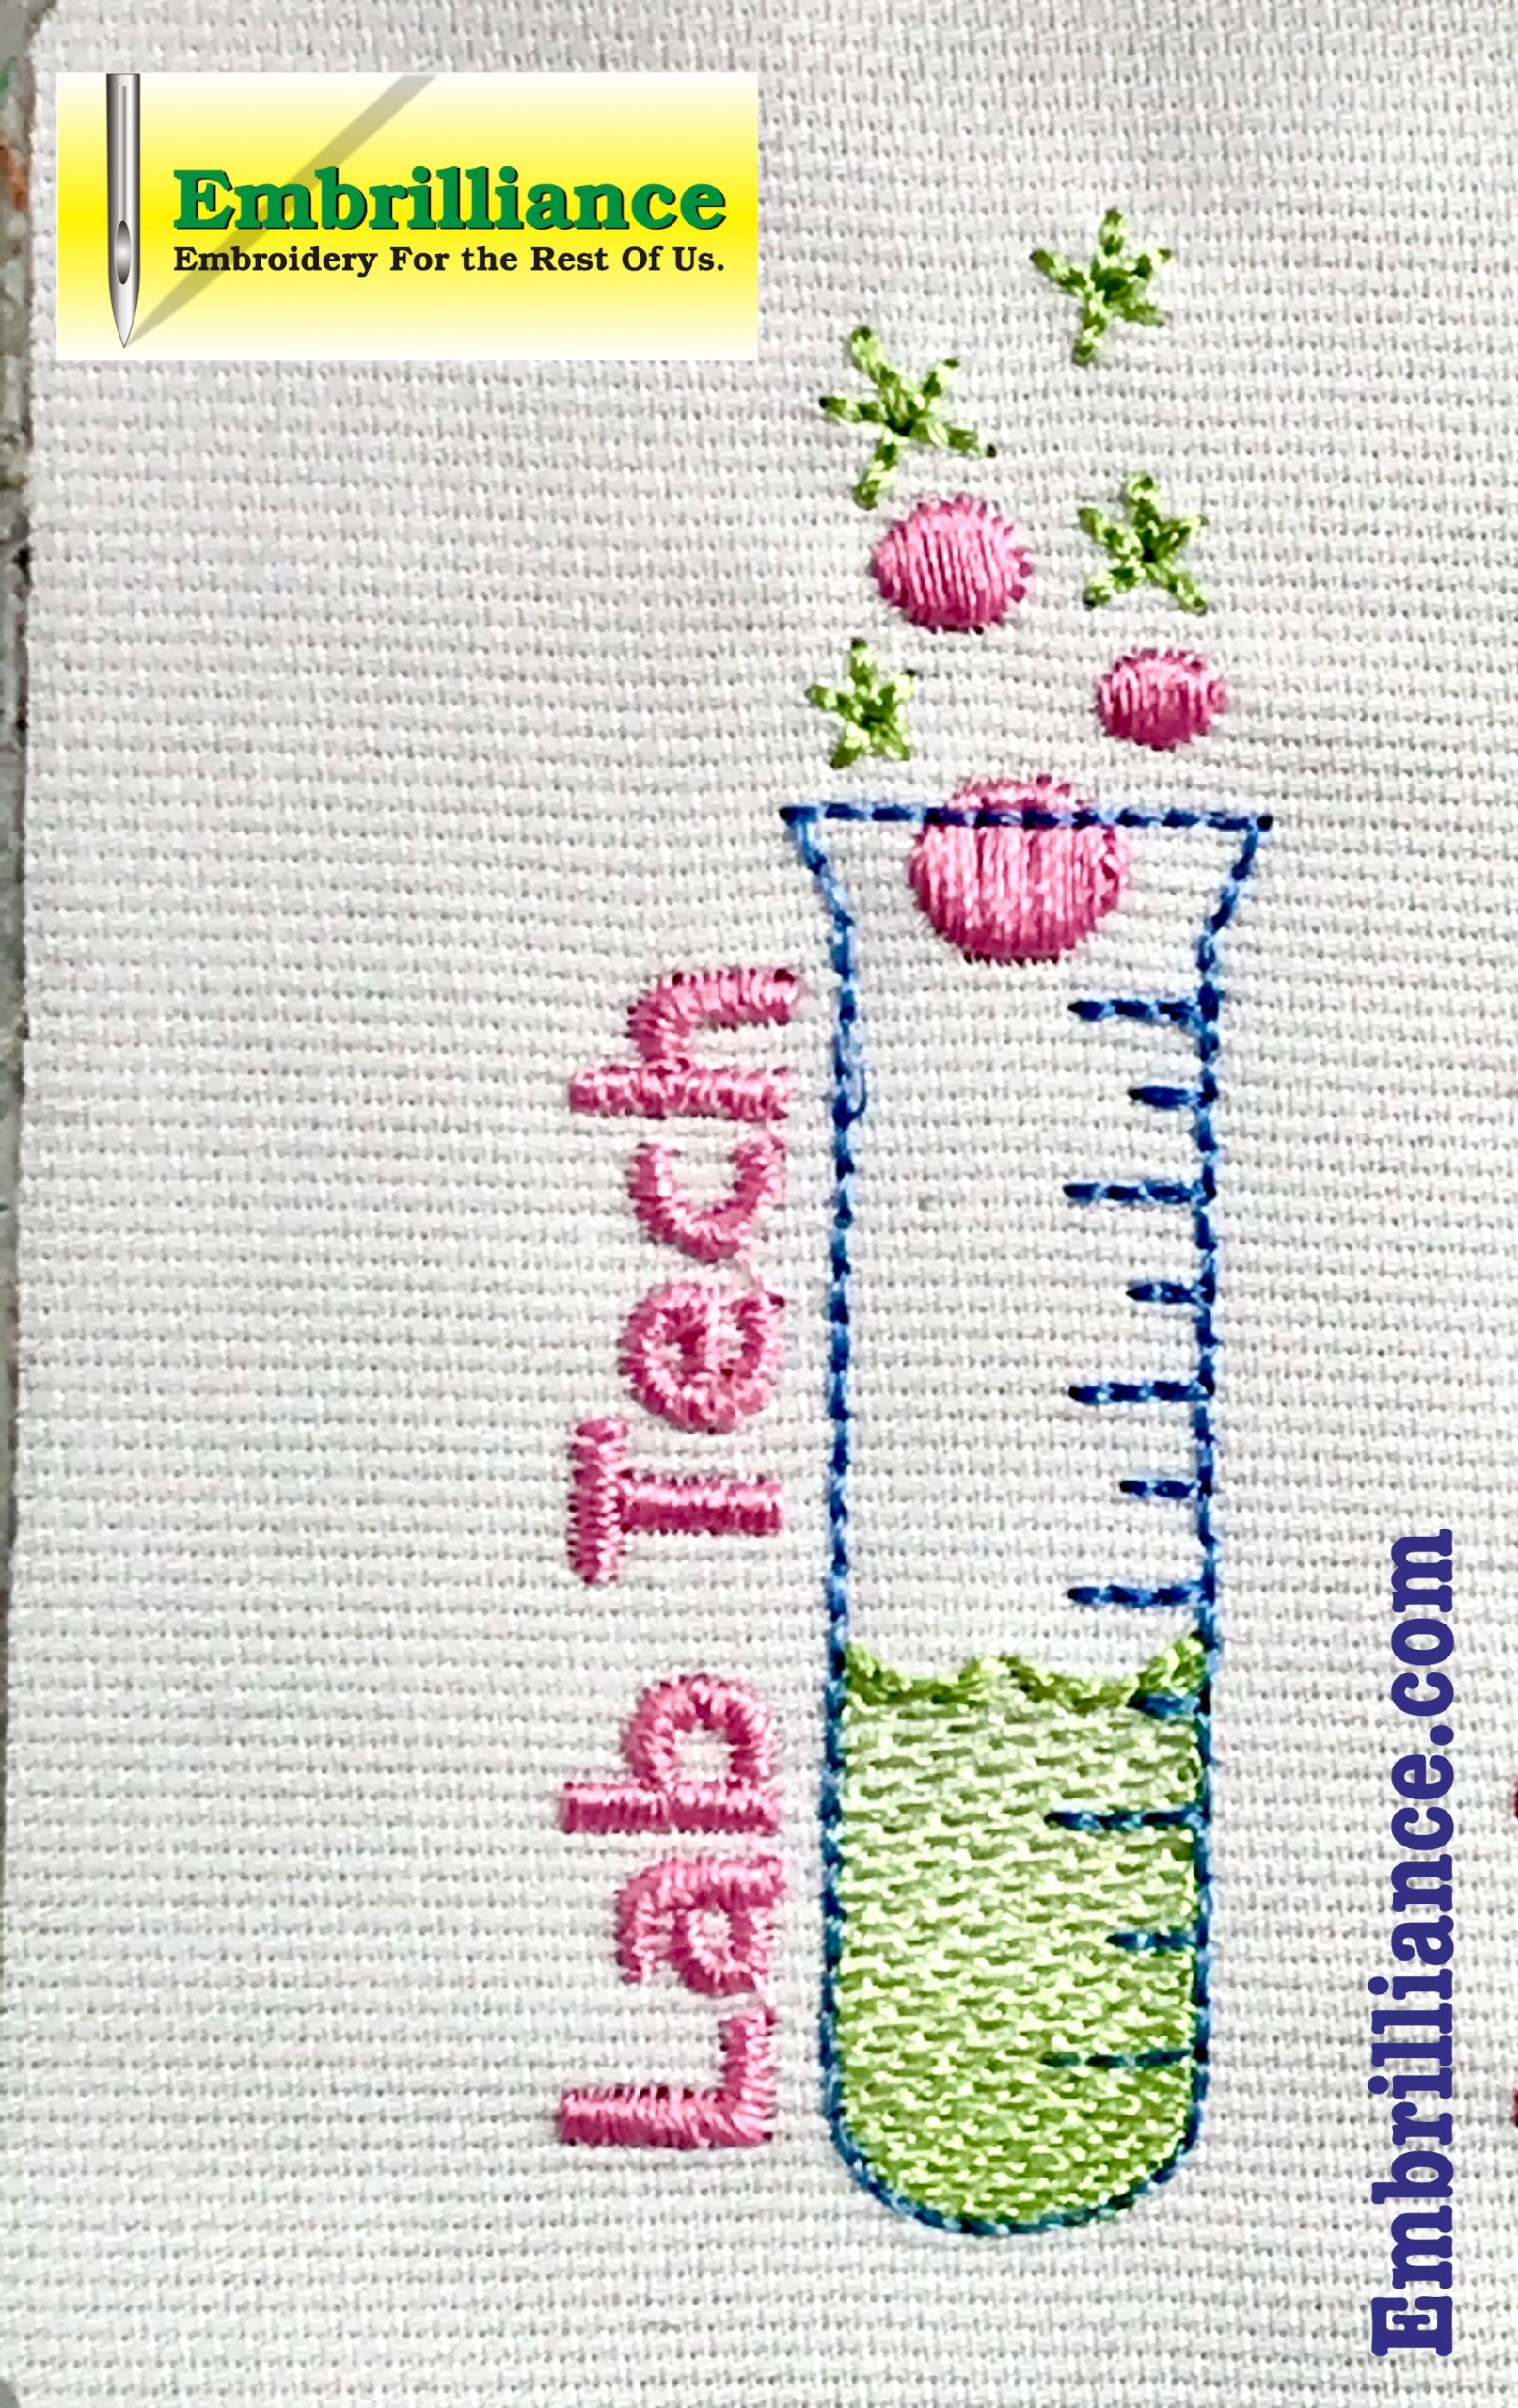 Stay Strong & Stitch On #9 Lab Tech Test Tube Design